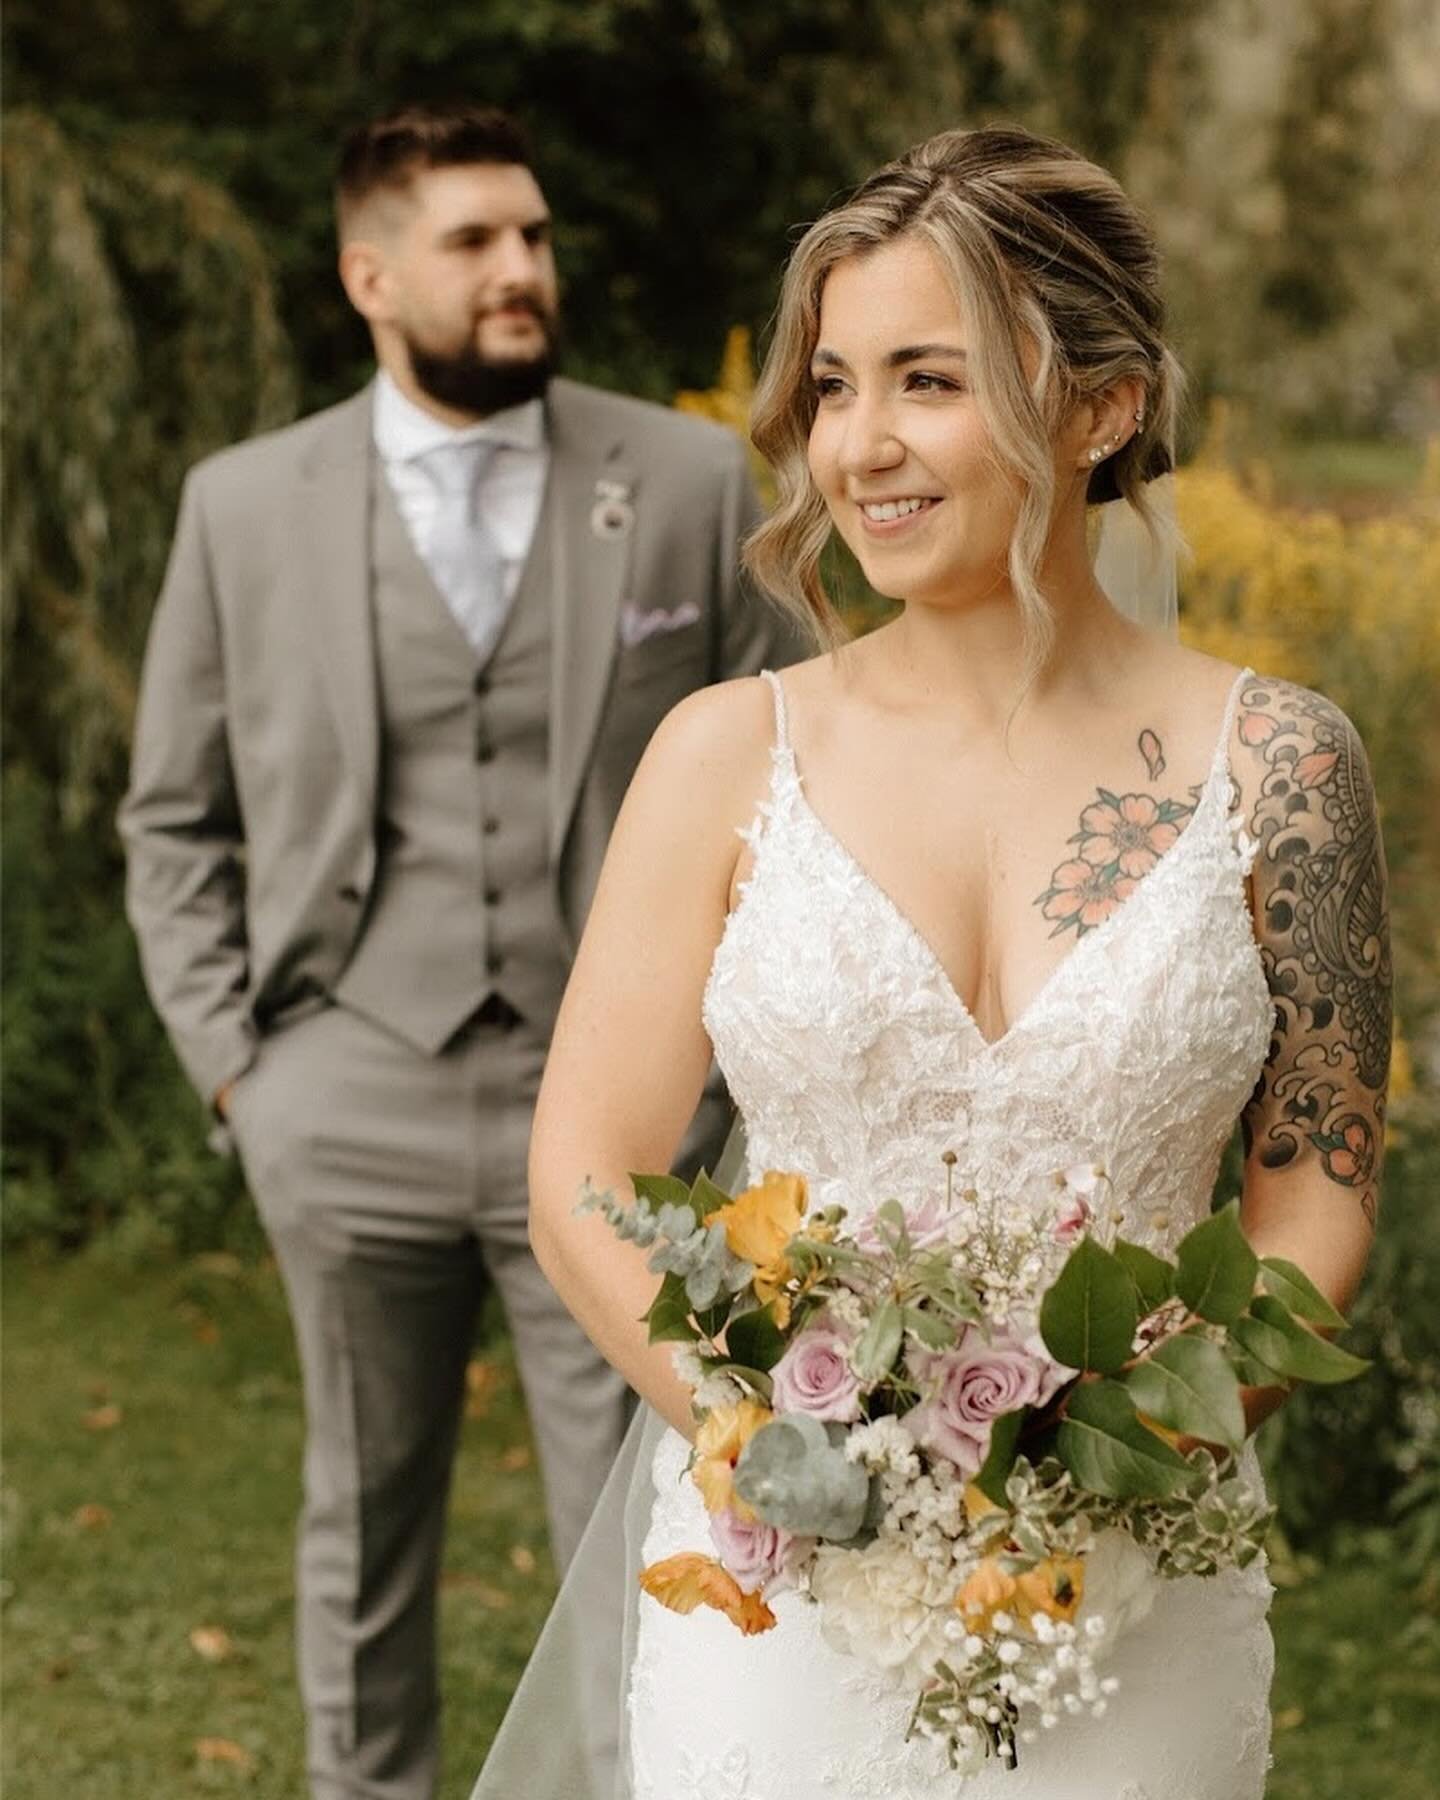 &ldquo;I had a great experience at Stolen Hearts Bridal from the beginning to the end. Amelia was great when it came to finding options I was looking for, and helped me find my dream dress. SHB I can&rsquo;t thank you enough!&rdquo; 💚